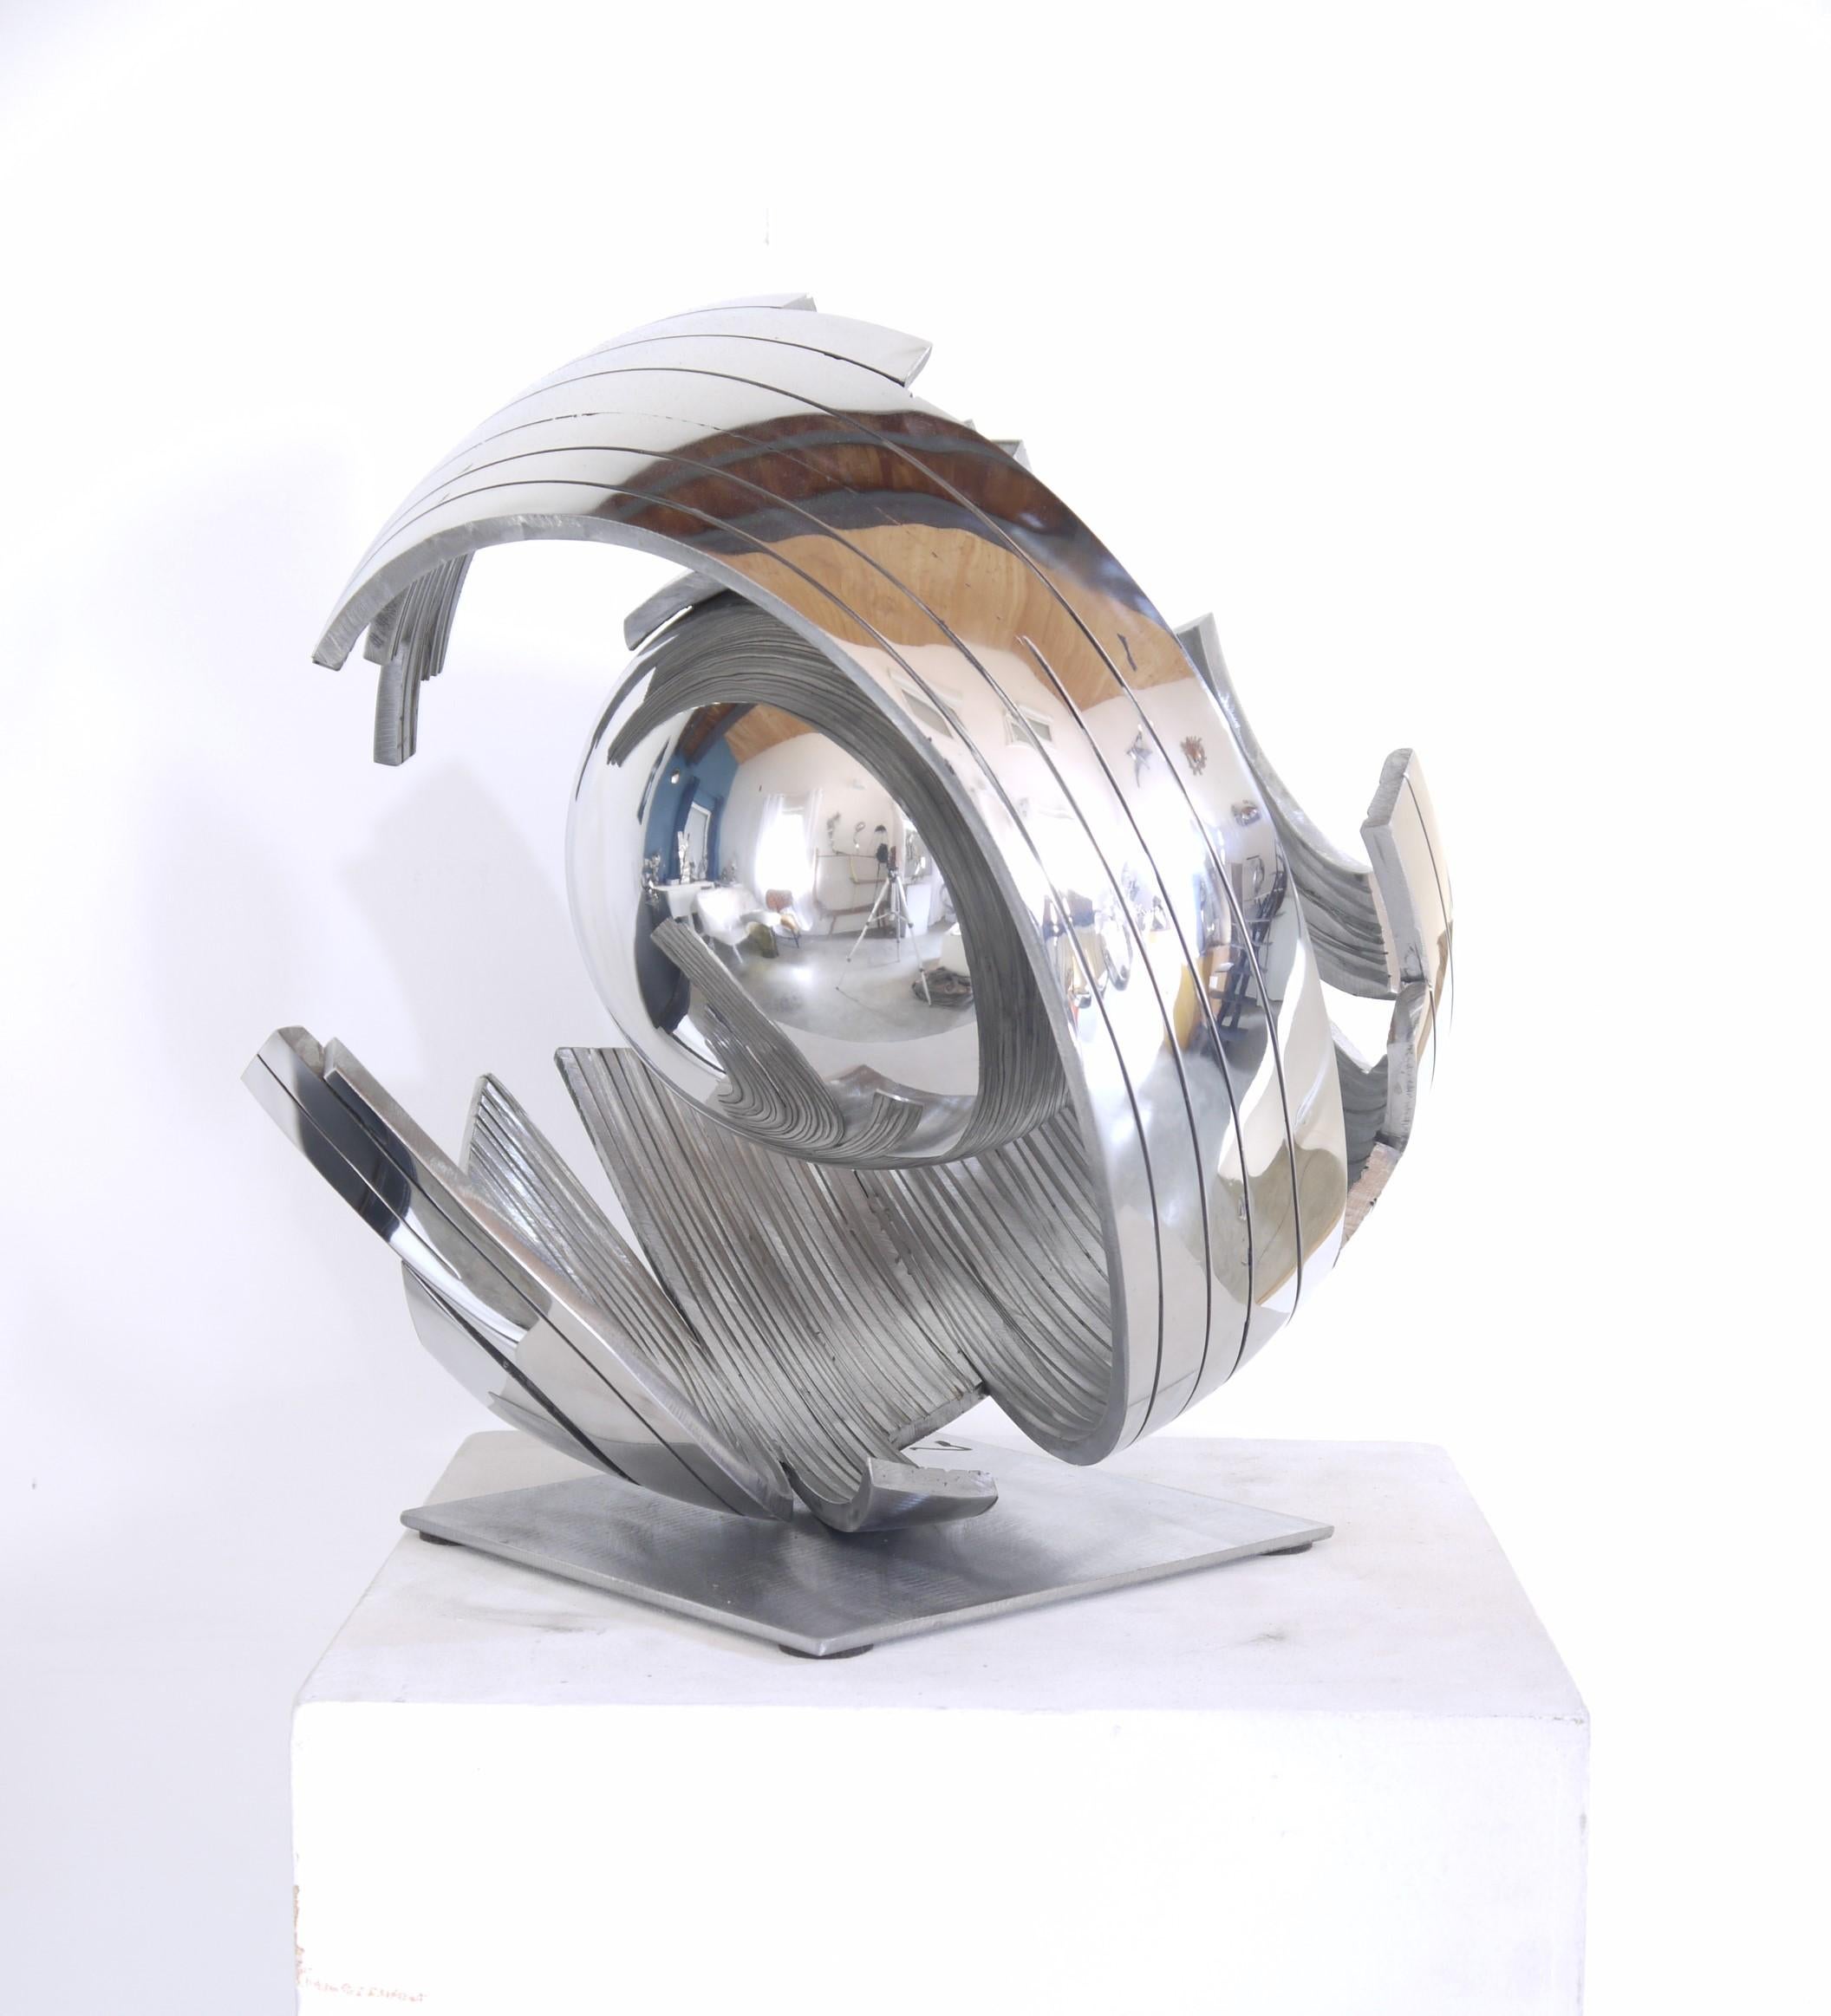 Exspir 13 - Abstract Geometric Sculpture by Guillaume Roche